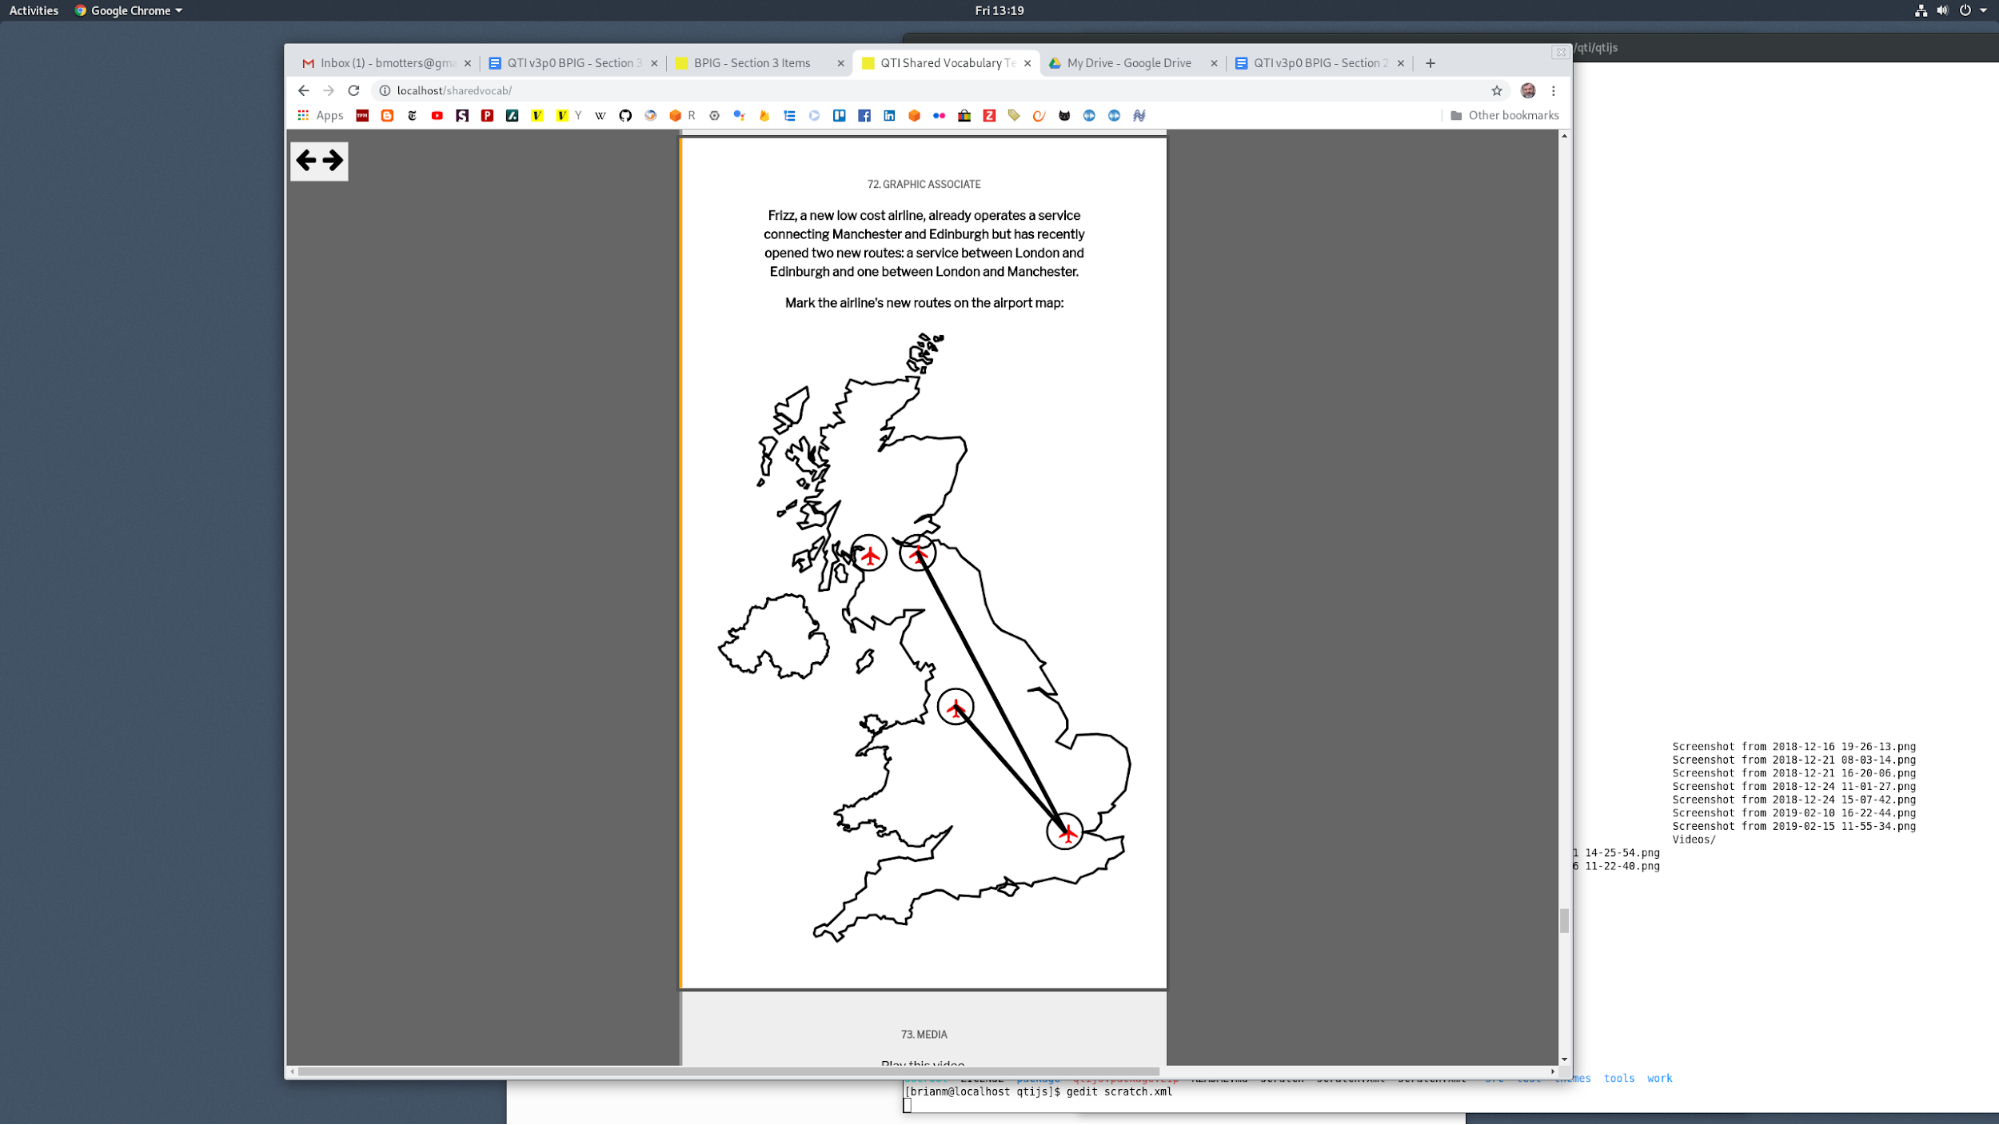 2 paragraphs of text are shown above an image. The image is a line drawing of the United Kingdom. 
                      There are 4 places that have icons of airplanes placed on the drawing. 3 of the icons are connected by lines.